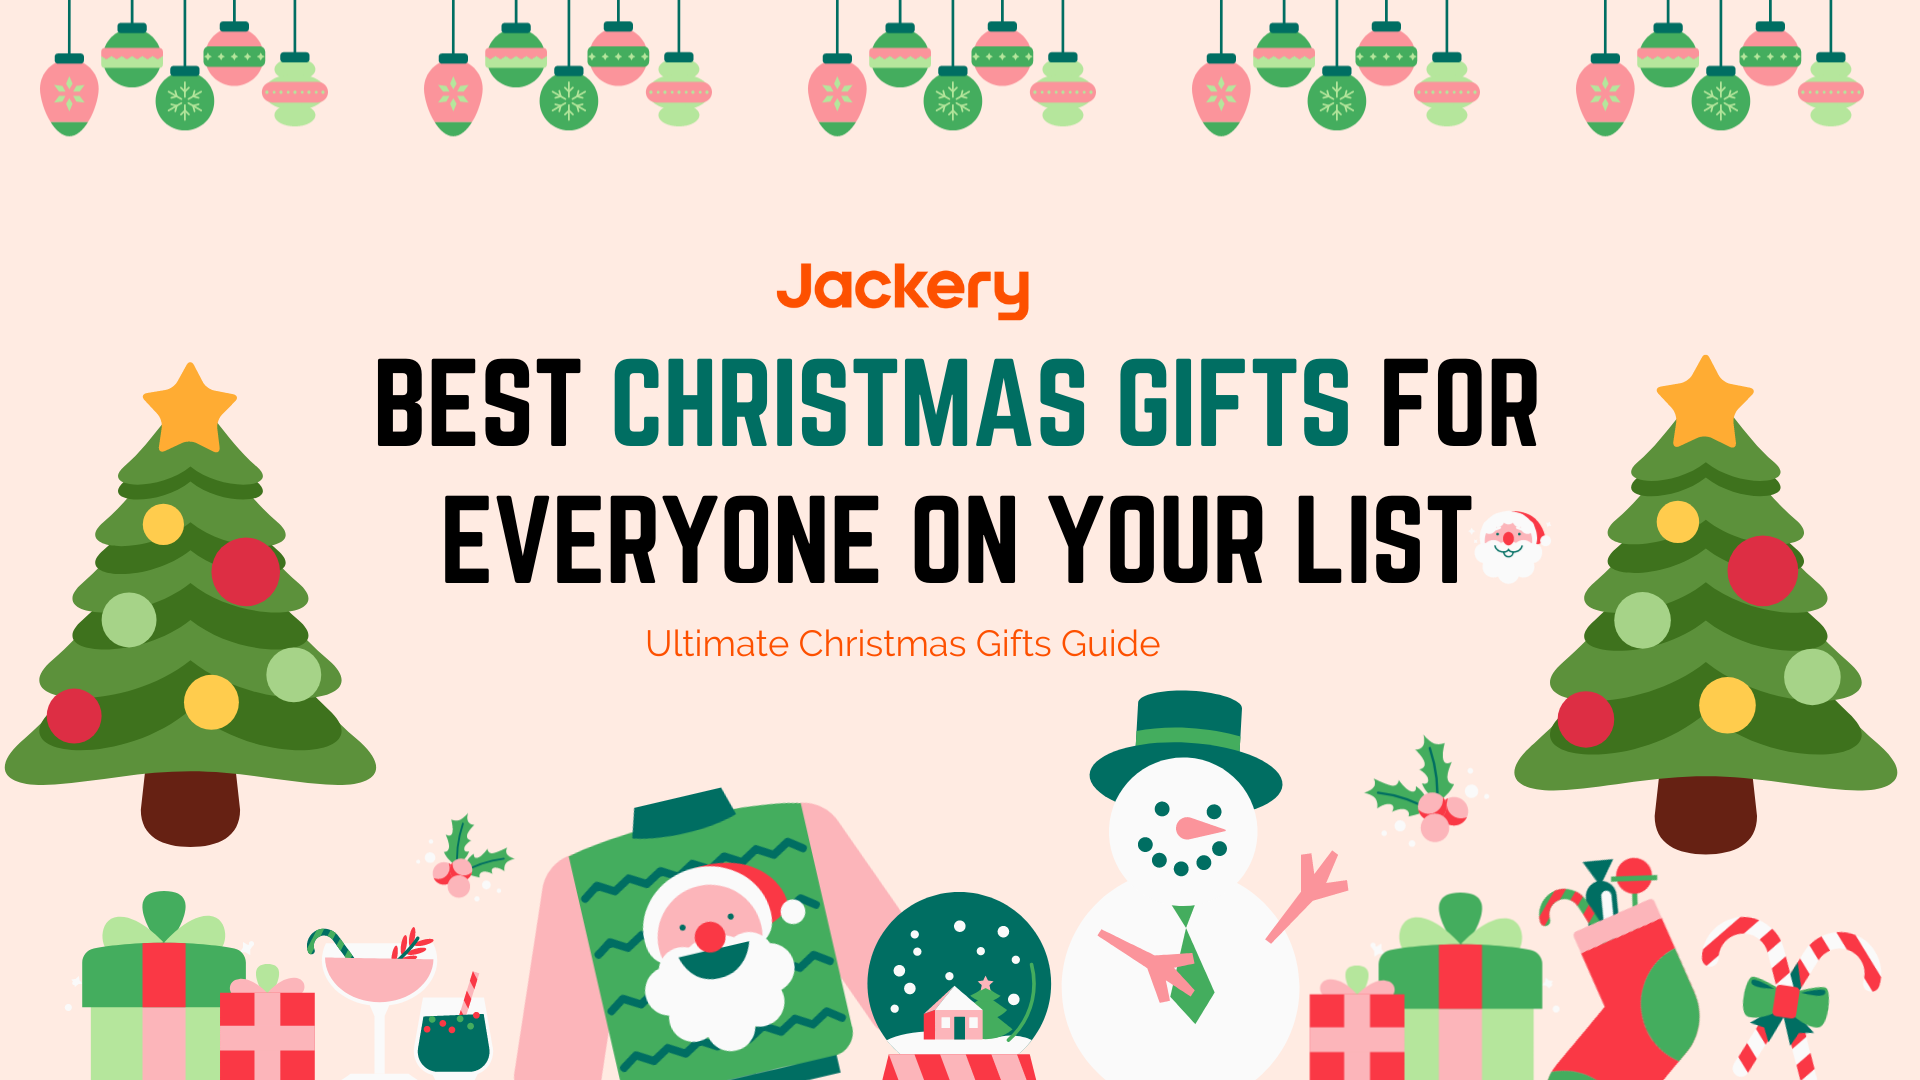 Christmas gifts ideas